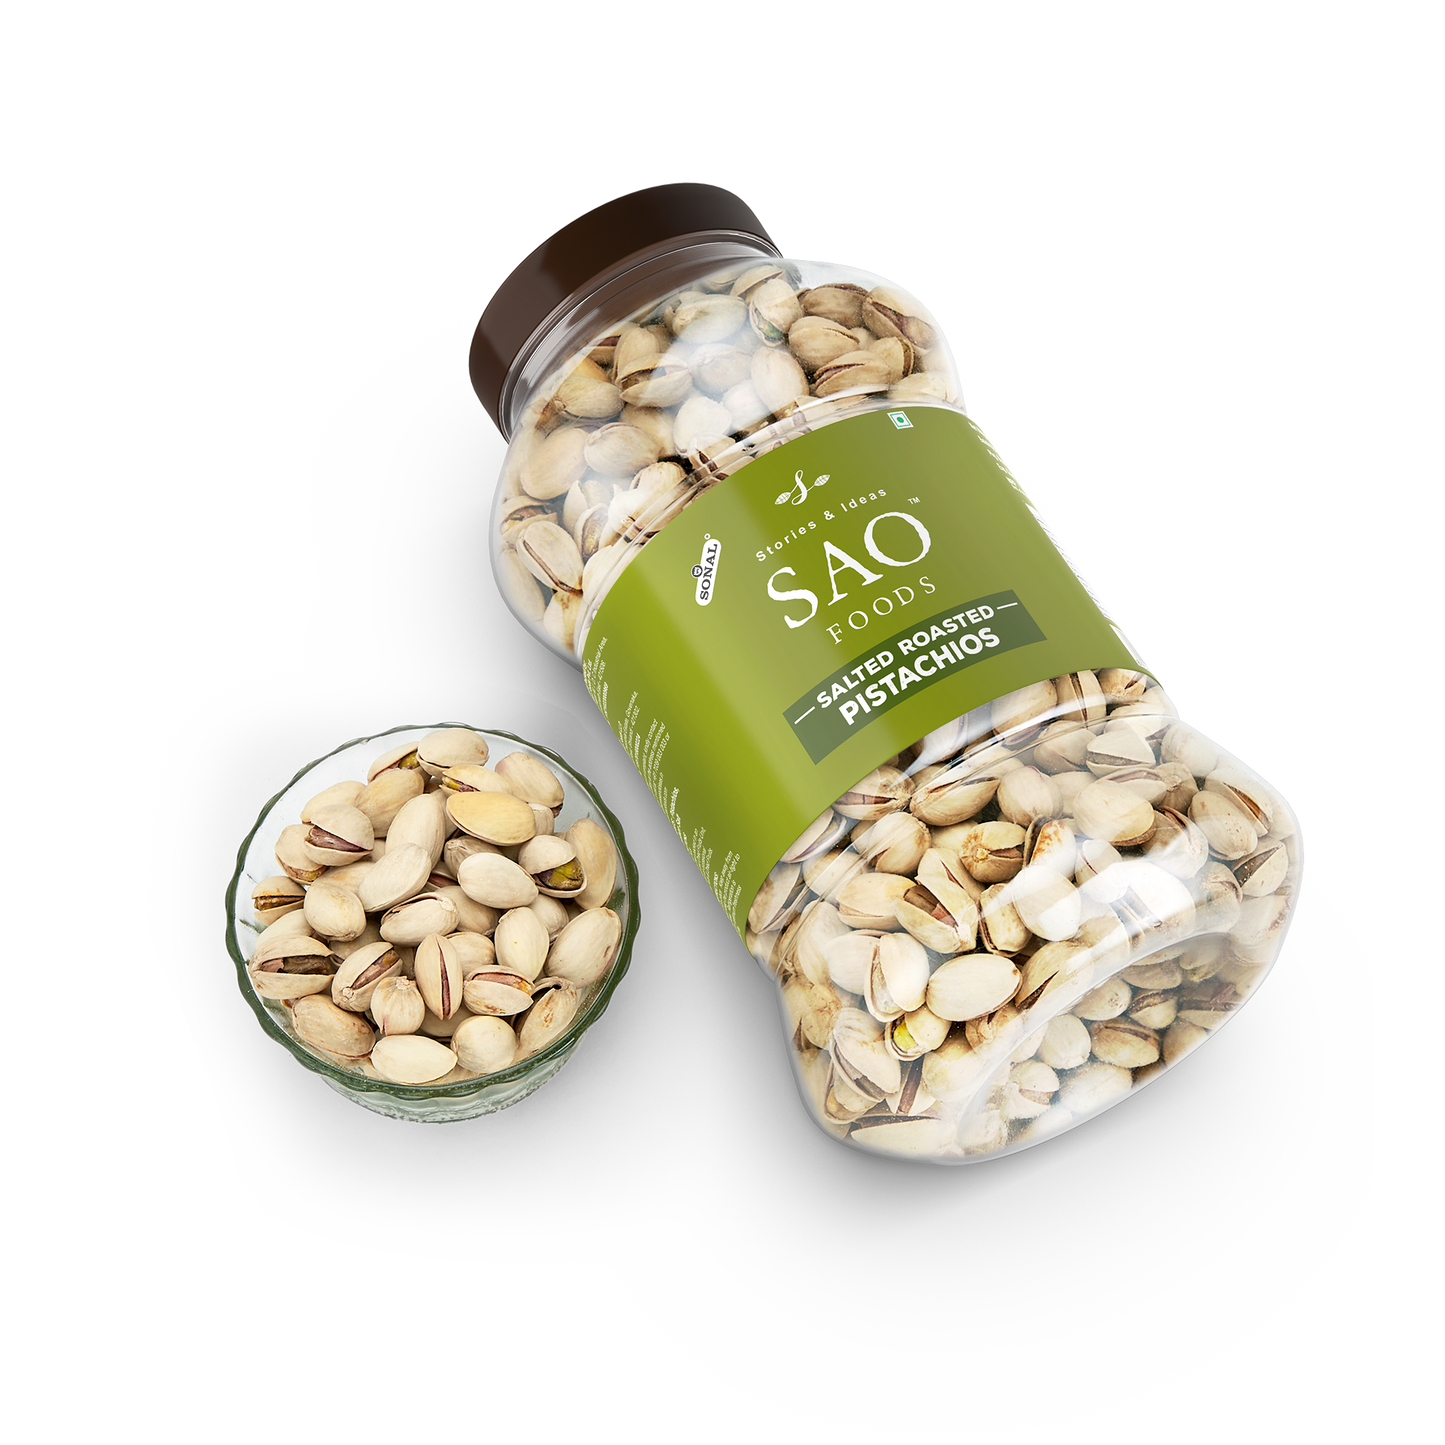 SAO Foods Salted Roasted Pistachios 1 kg